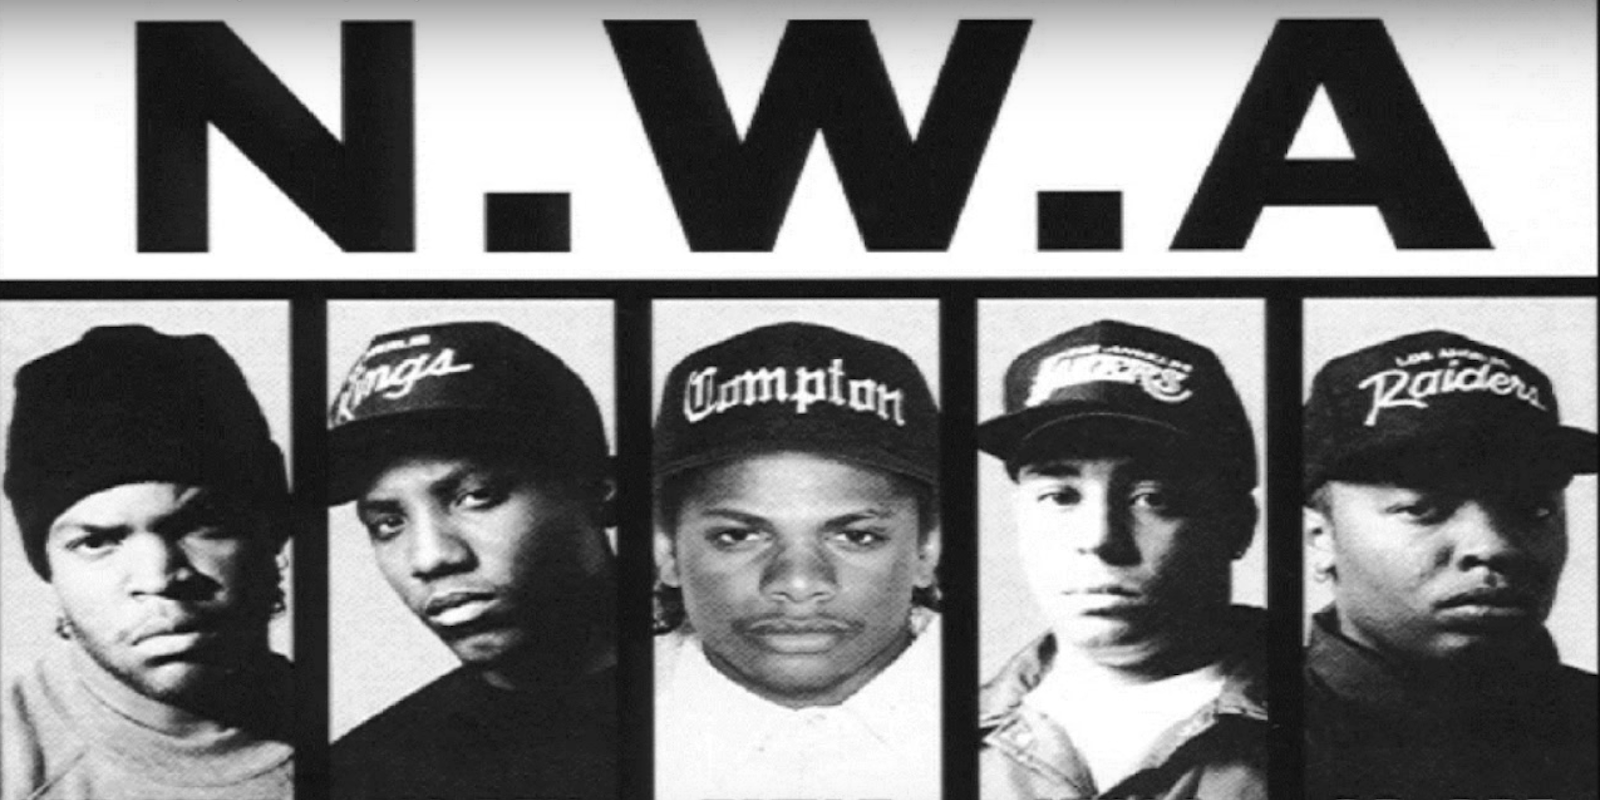 A prankster hacked a police radio in New Zealand to play N.W.A.'s song 'Fuck tha Police.'